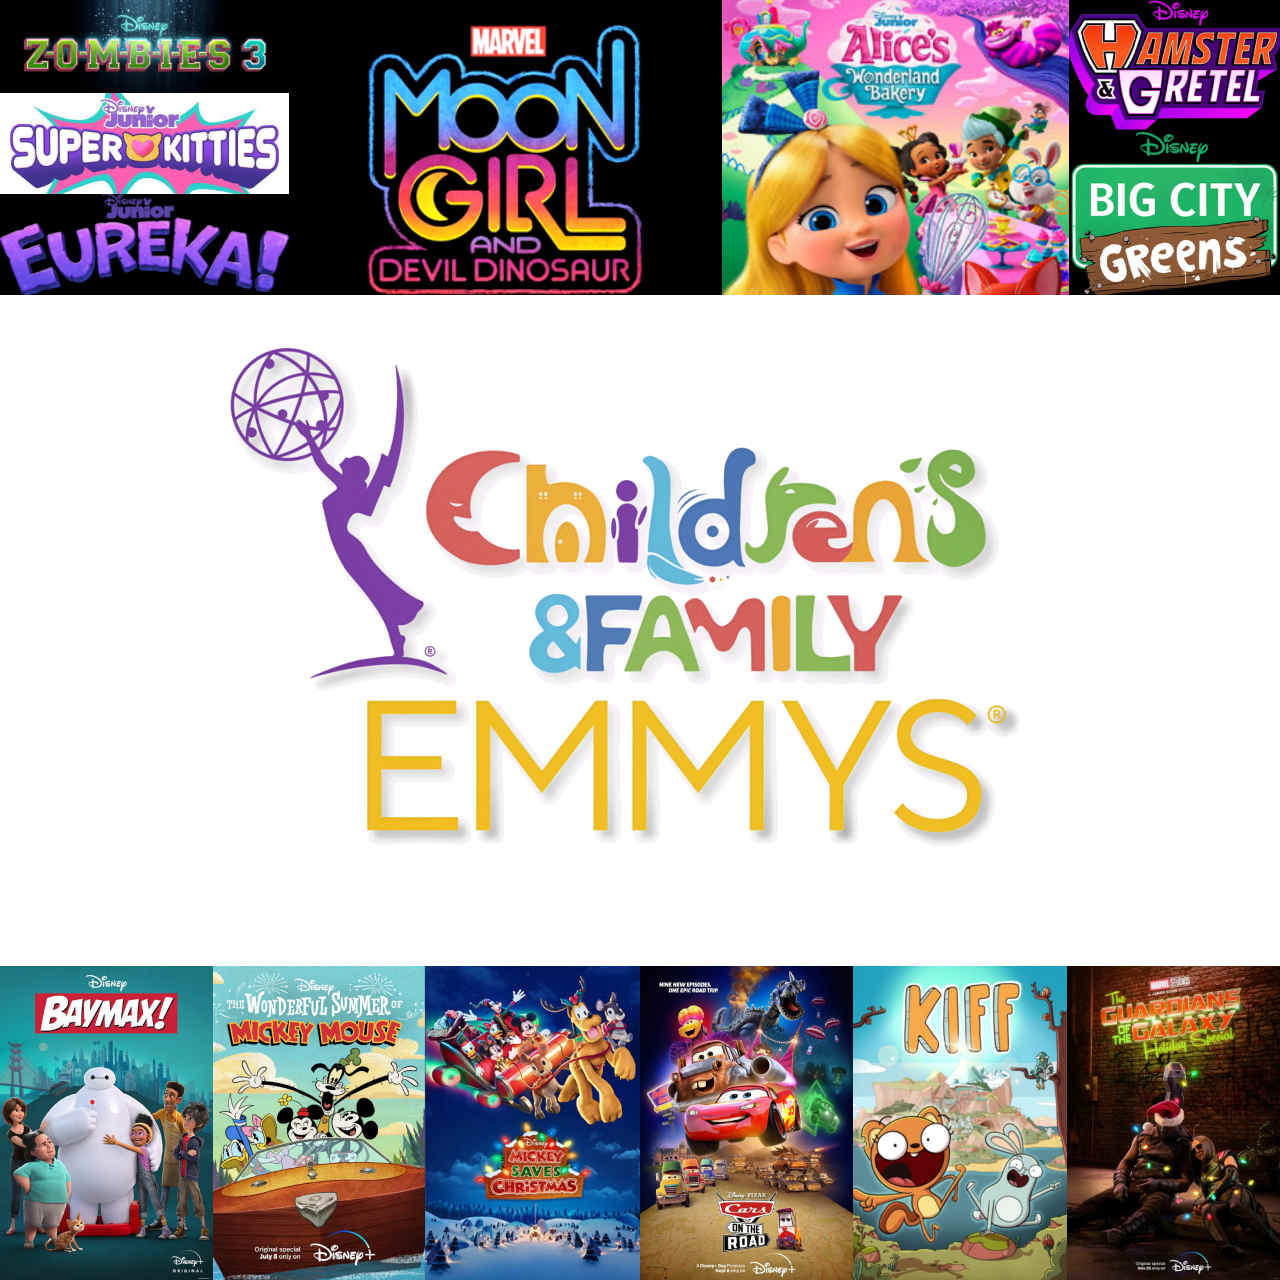 The Children's & Family Emmys logo surrounded by posters and logos from Zombies 3, Super Kitties, Eureka!, Moon Girl & Devil Dinosaur, Alice's Wonderland Bakery, Hamster & Gretel, Big City Greens, Cars on the Road, The Wonderful Summer of Mickey Mouse, Mickey Saves Christmas, Kiff, and The Guardians of the Galaxy Holiday.